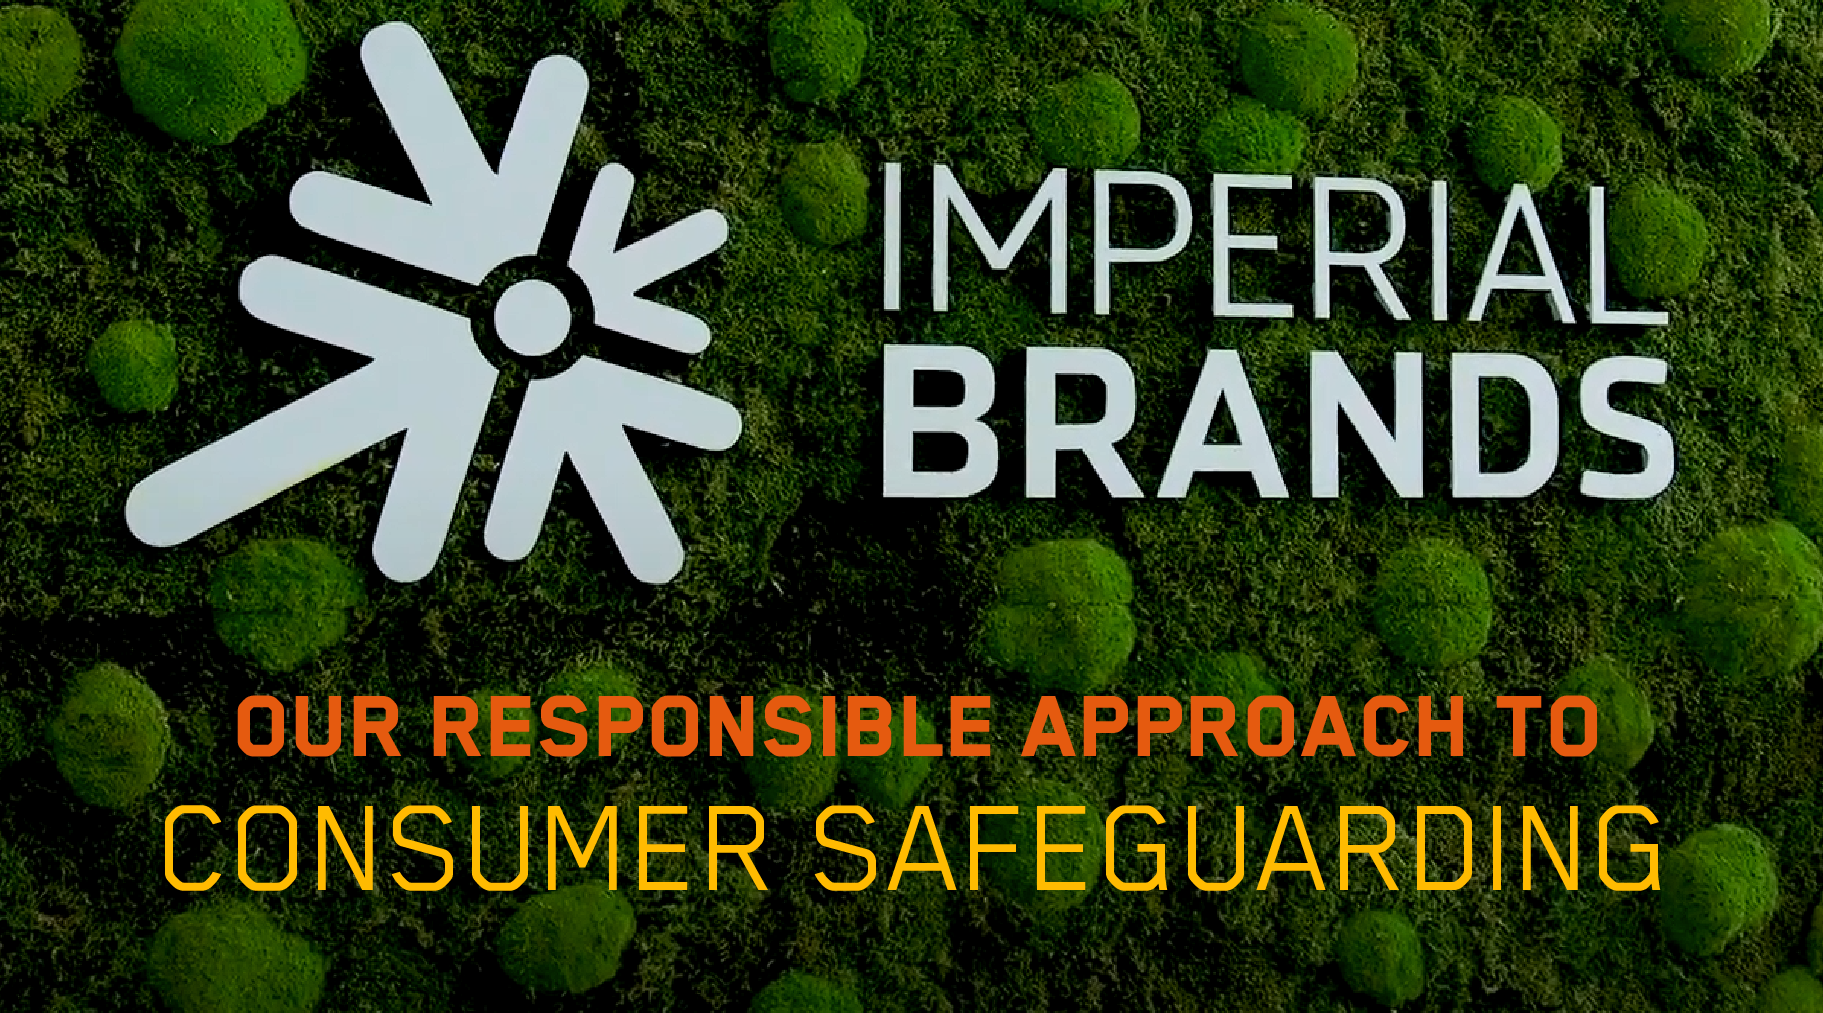 Our Responsible Approach to Consumer Safeguarding